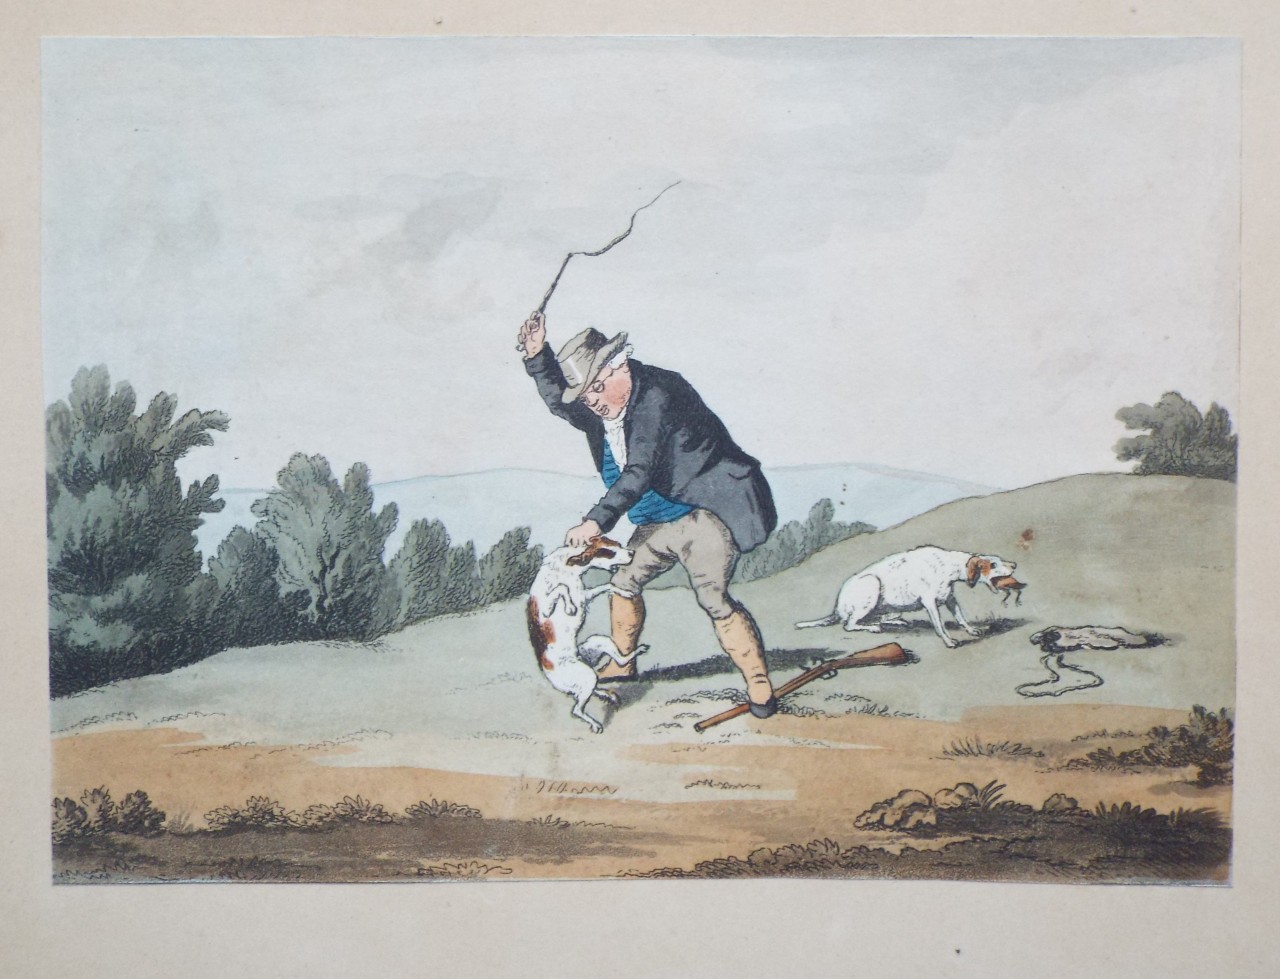 Aquatint - Sportsman whipping dog; second dog with bird in mouth; gun on ground. - Woodman